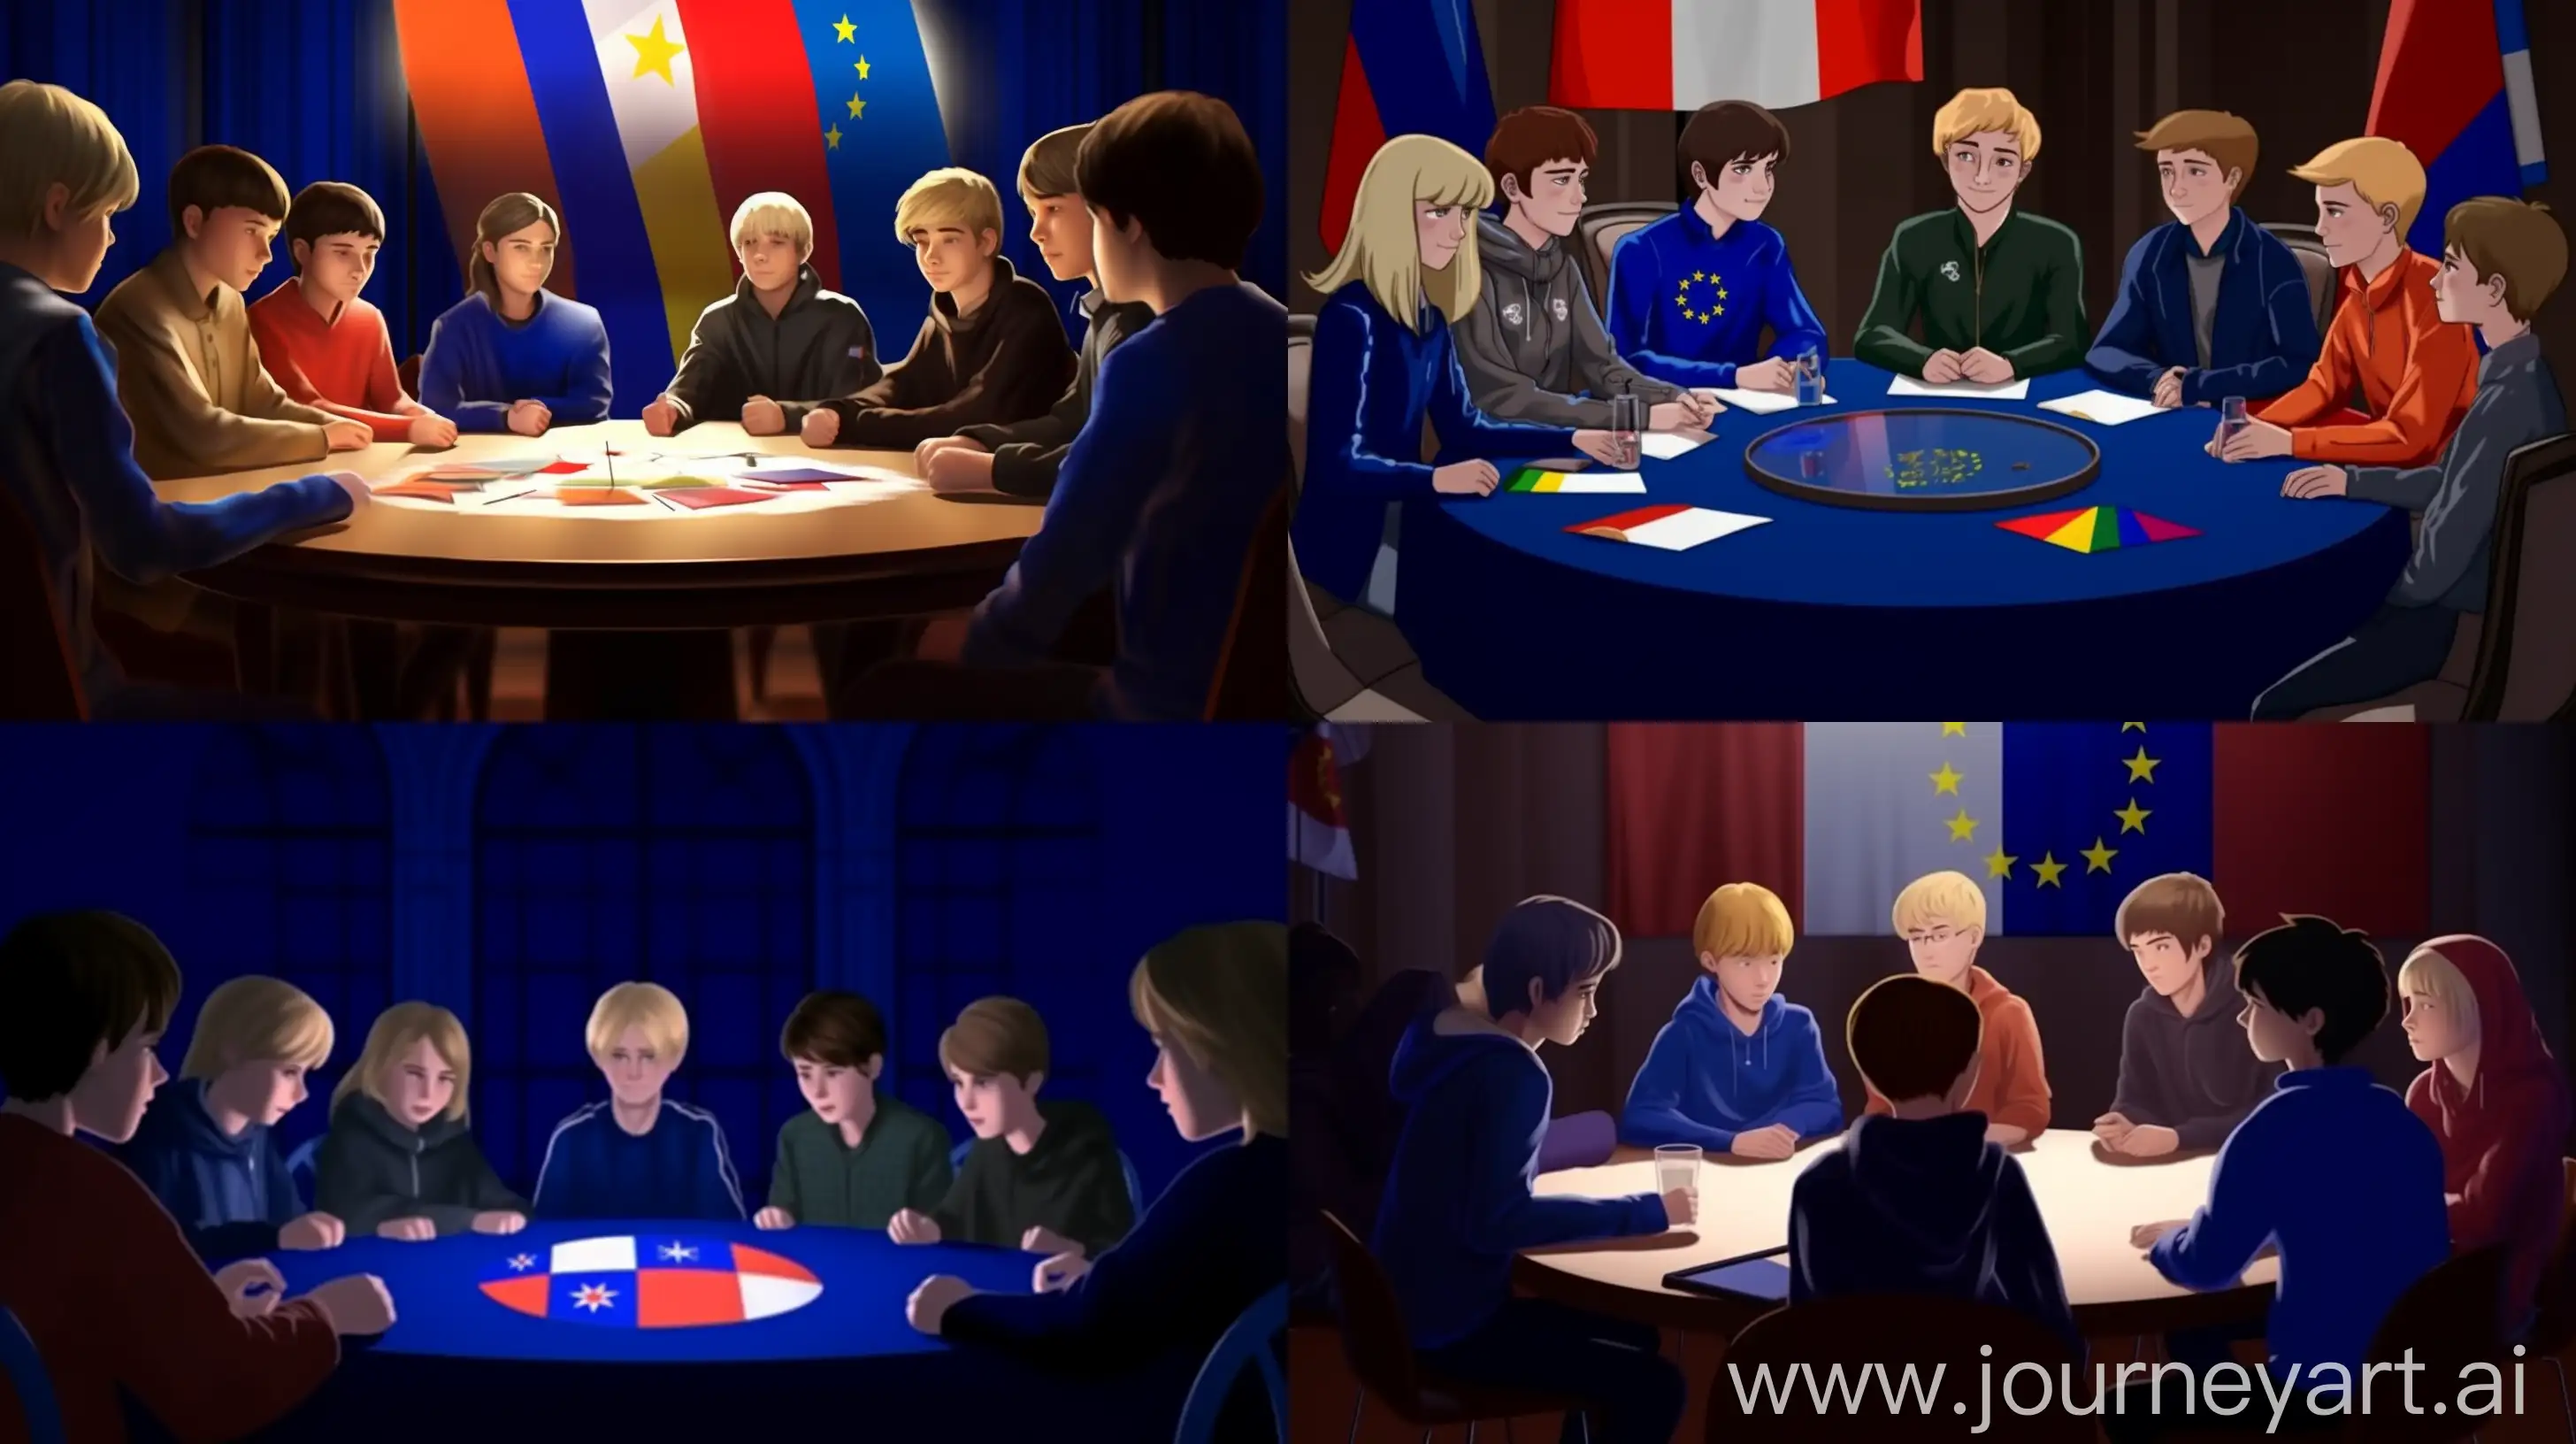 Diplomatic-Round-Table-International-Youth-Summit-with-Flags-of-Russia-and-EU